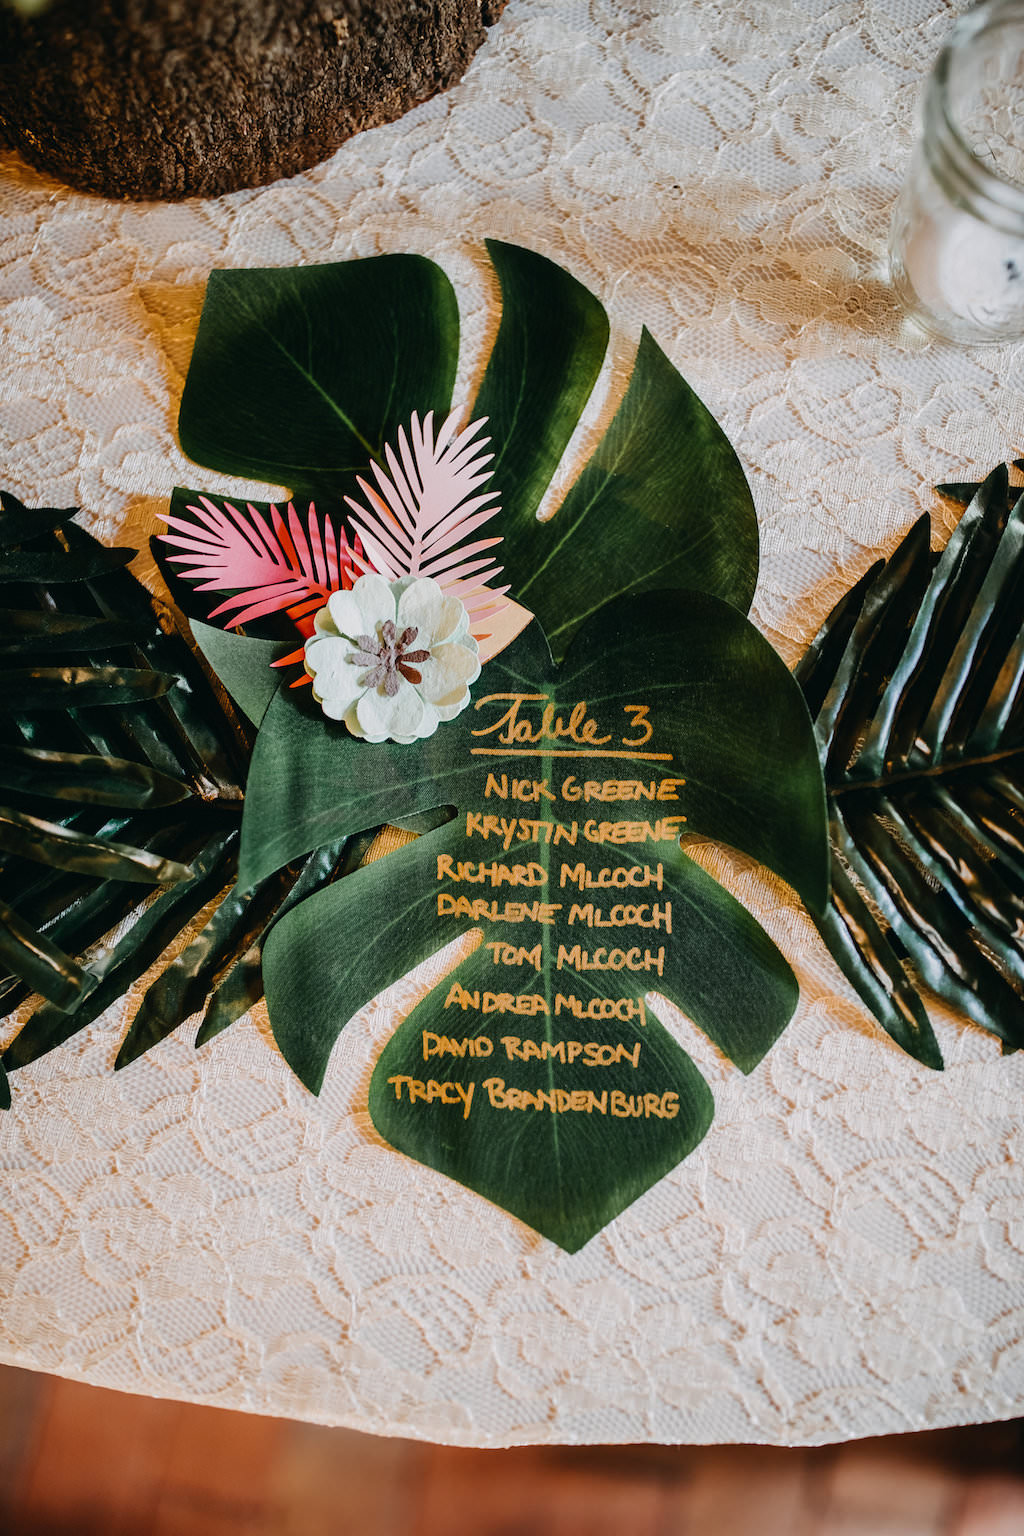 Unique Creative Tropical Inspired Table Seating on Palm Fronds with Gold Font and White and Pink Paper Flower | Tampa Bay Photographer Rad Red Creative